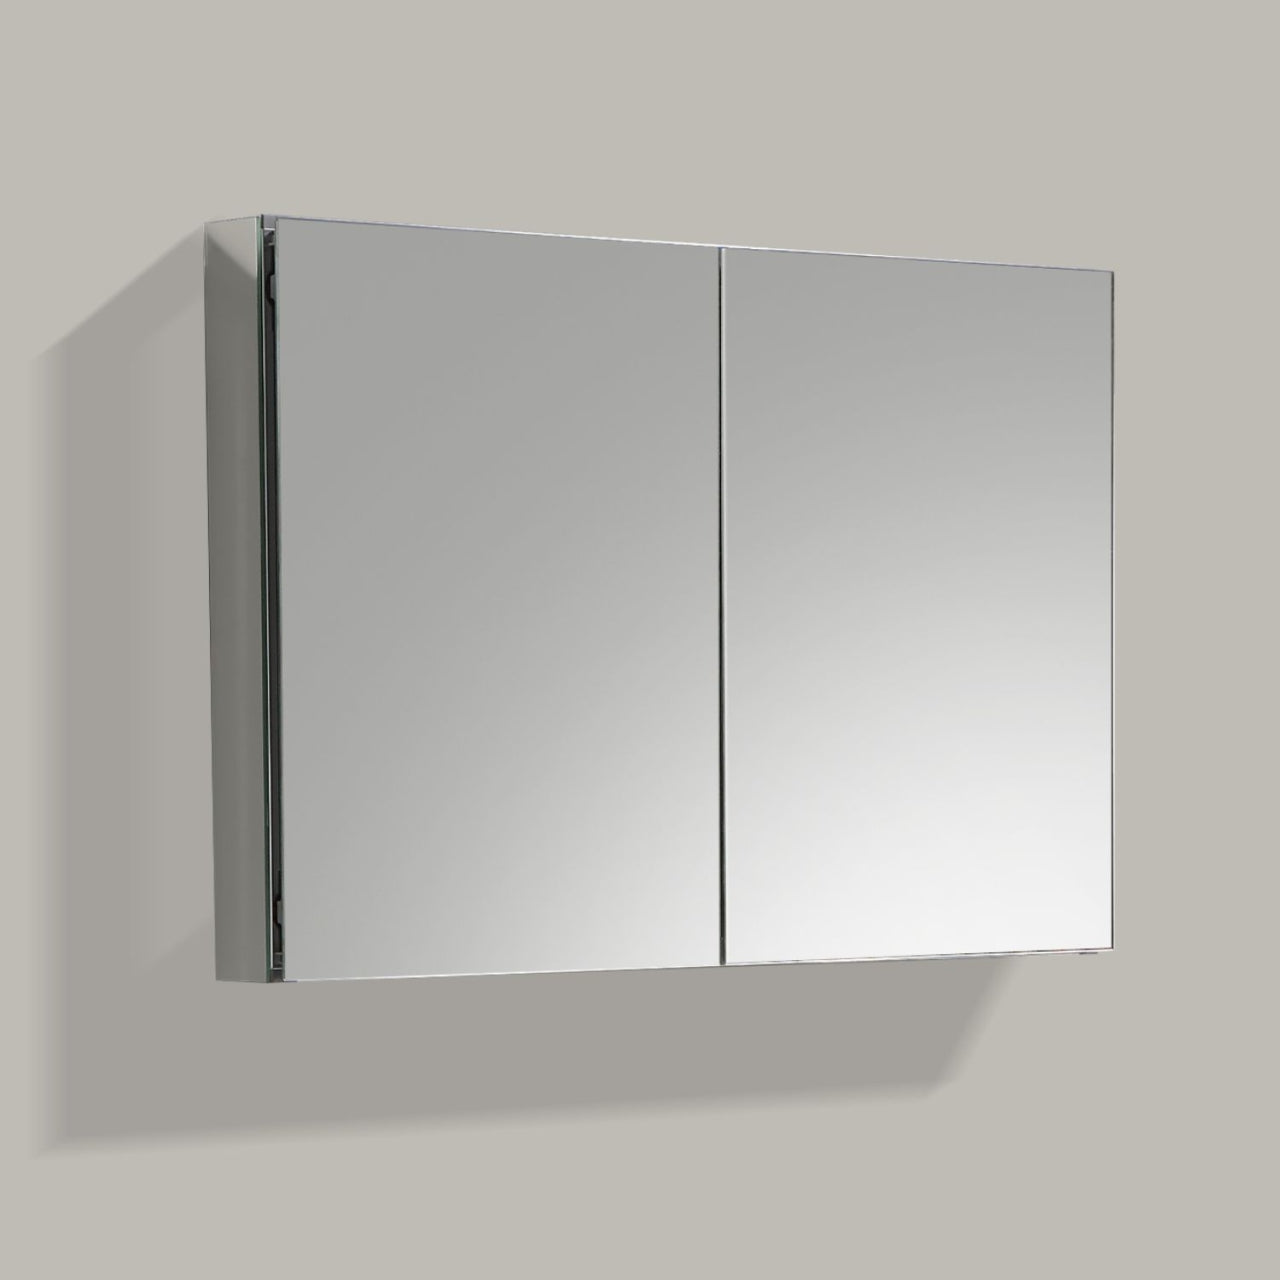 Kube 40" Mirrored Medicine Cabinet - Home and Bath Depot